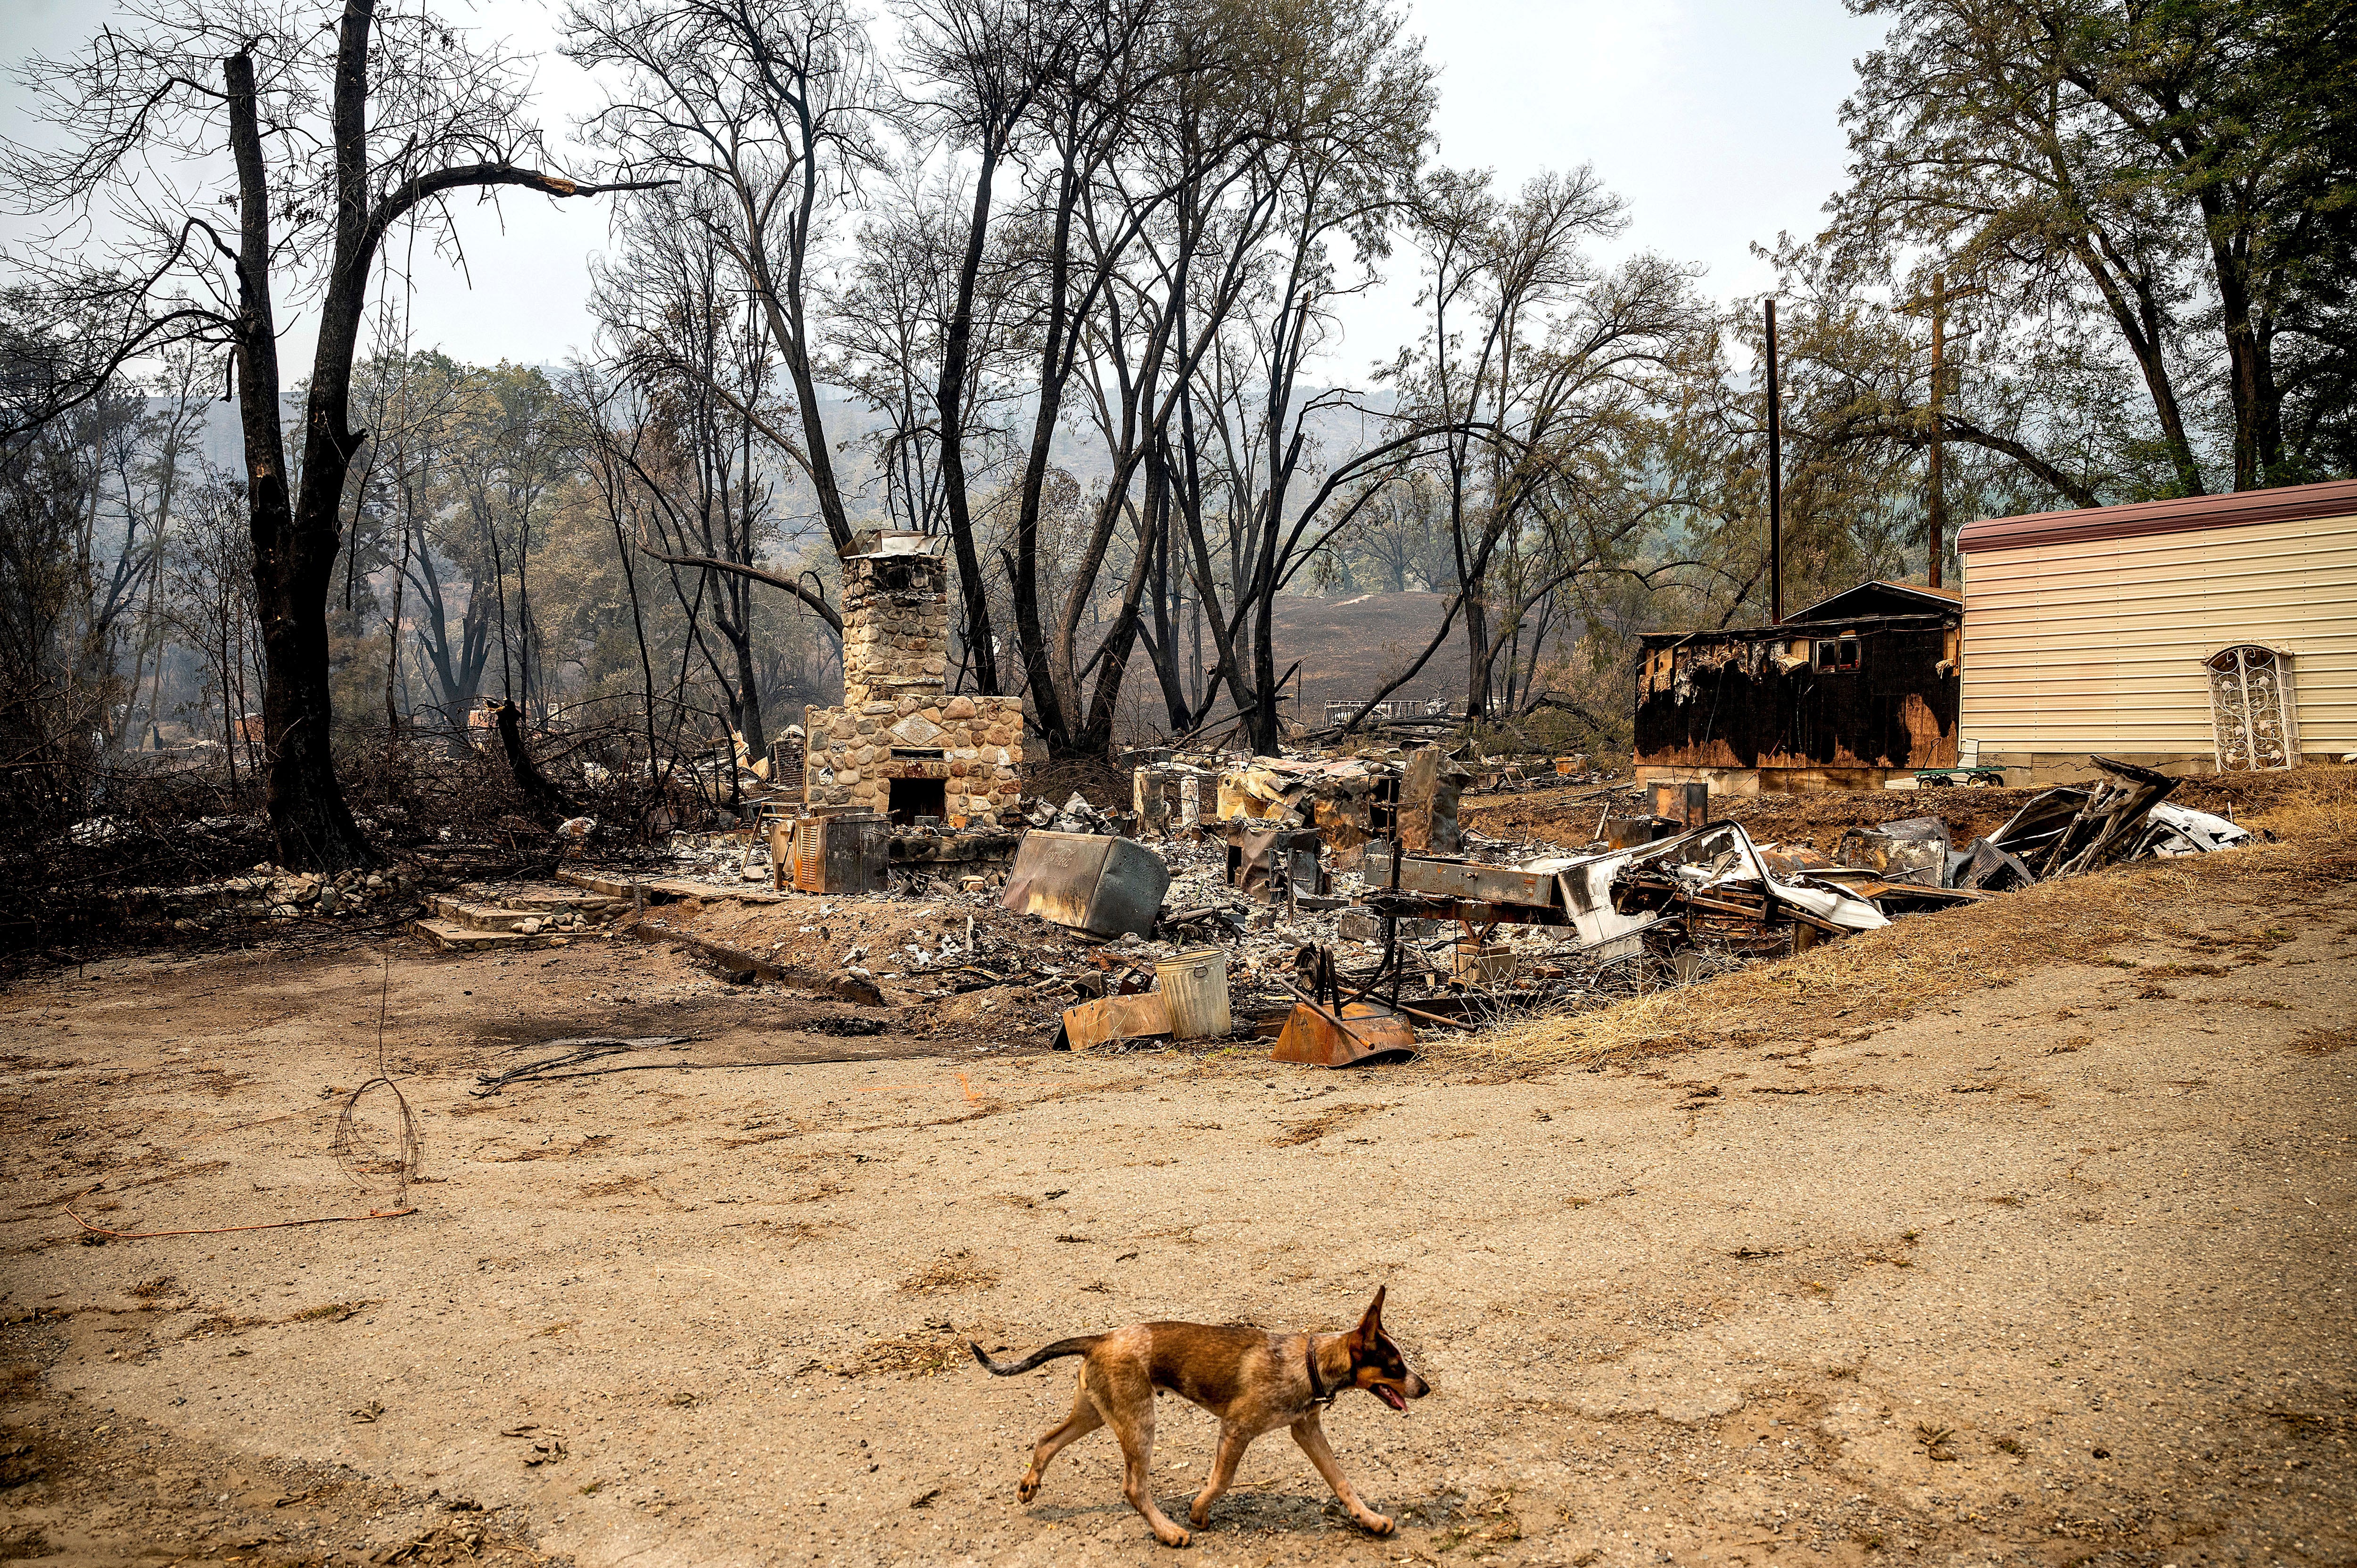 California wildfire wipes out scenic hamlet by Klamath River